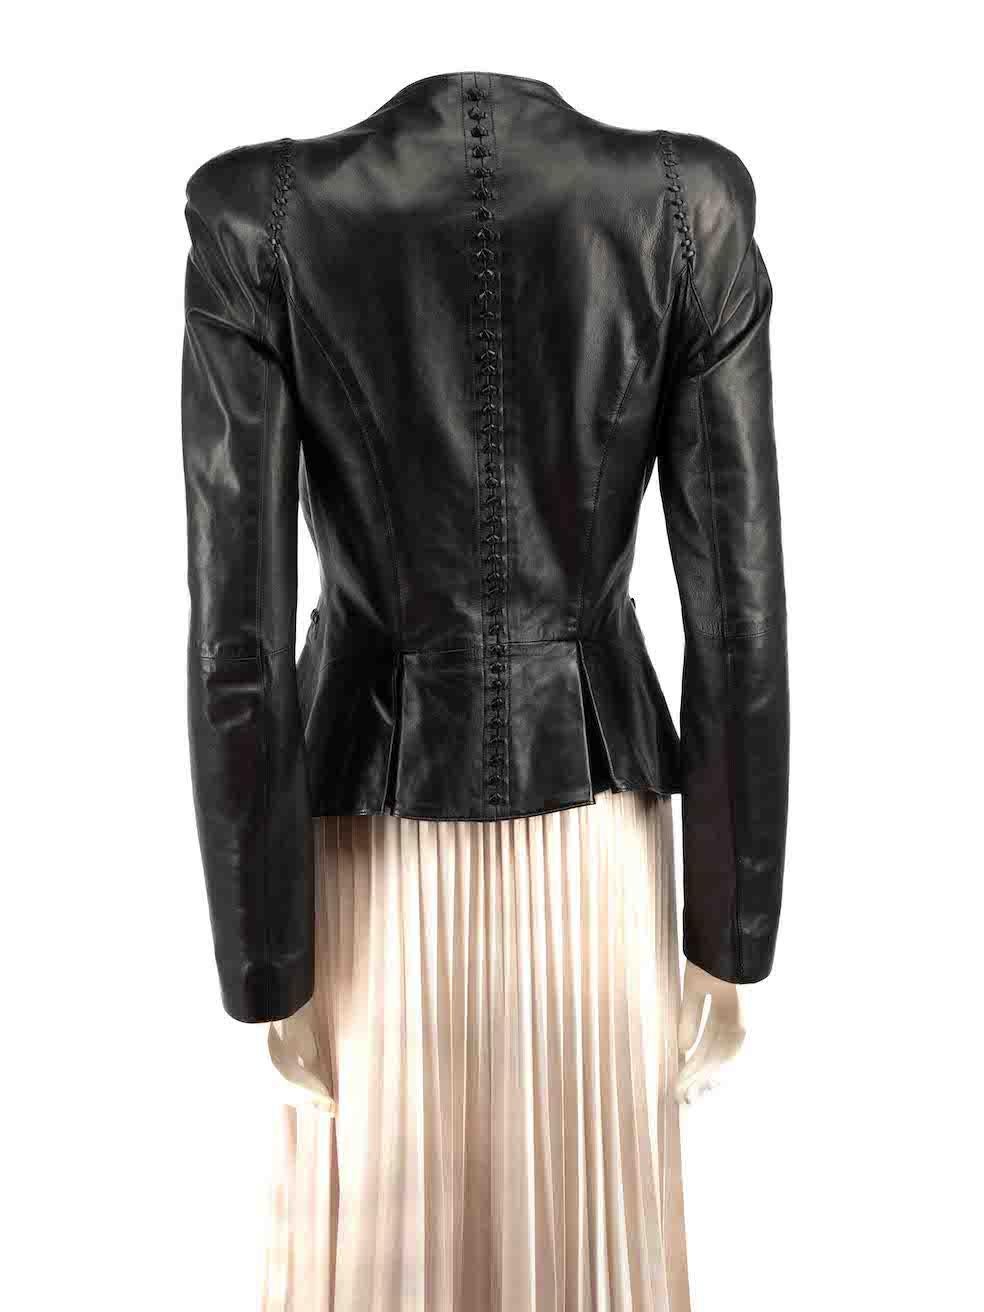 Alexander McQueen Black Leather Flared Hem Blazer Size L In Good Condition For Sale In London, GB